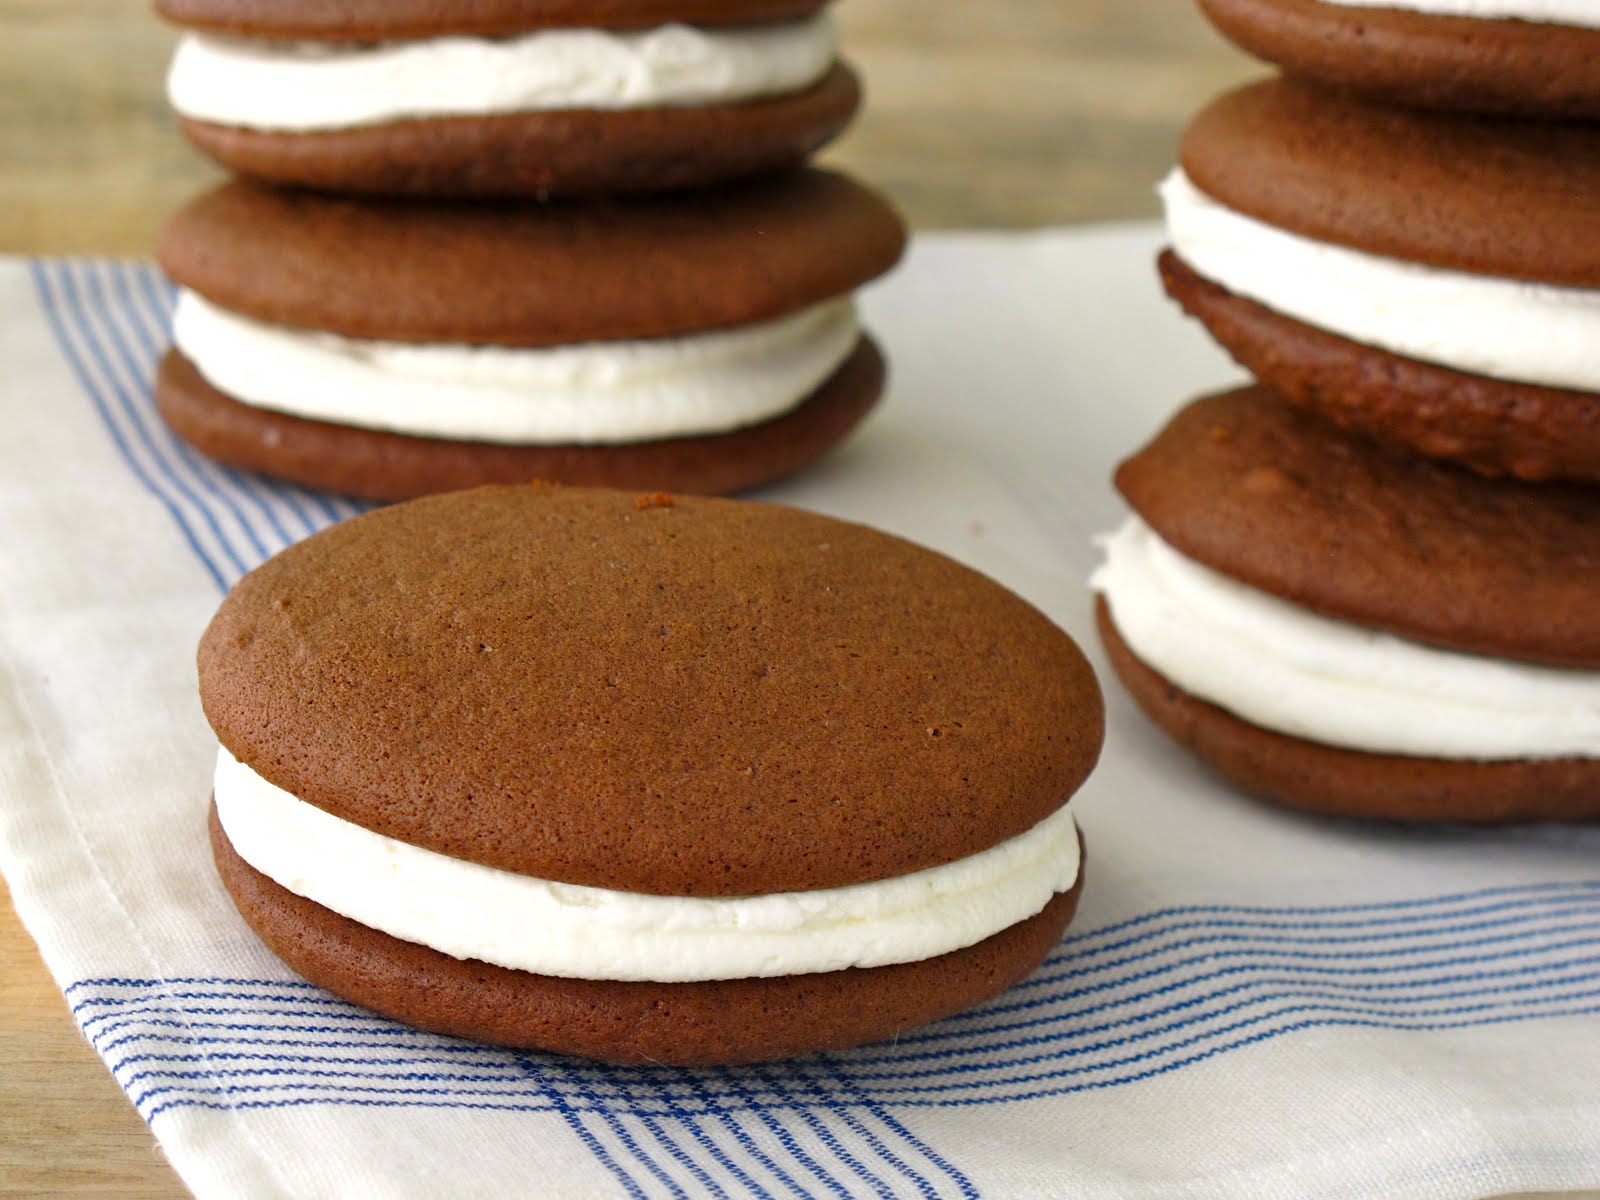 What is an easy recipe for whoopie pies?